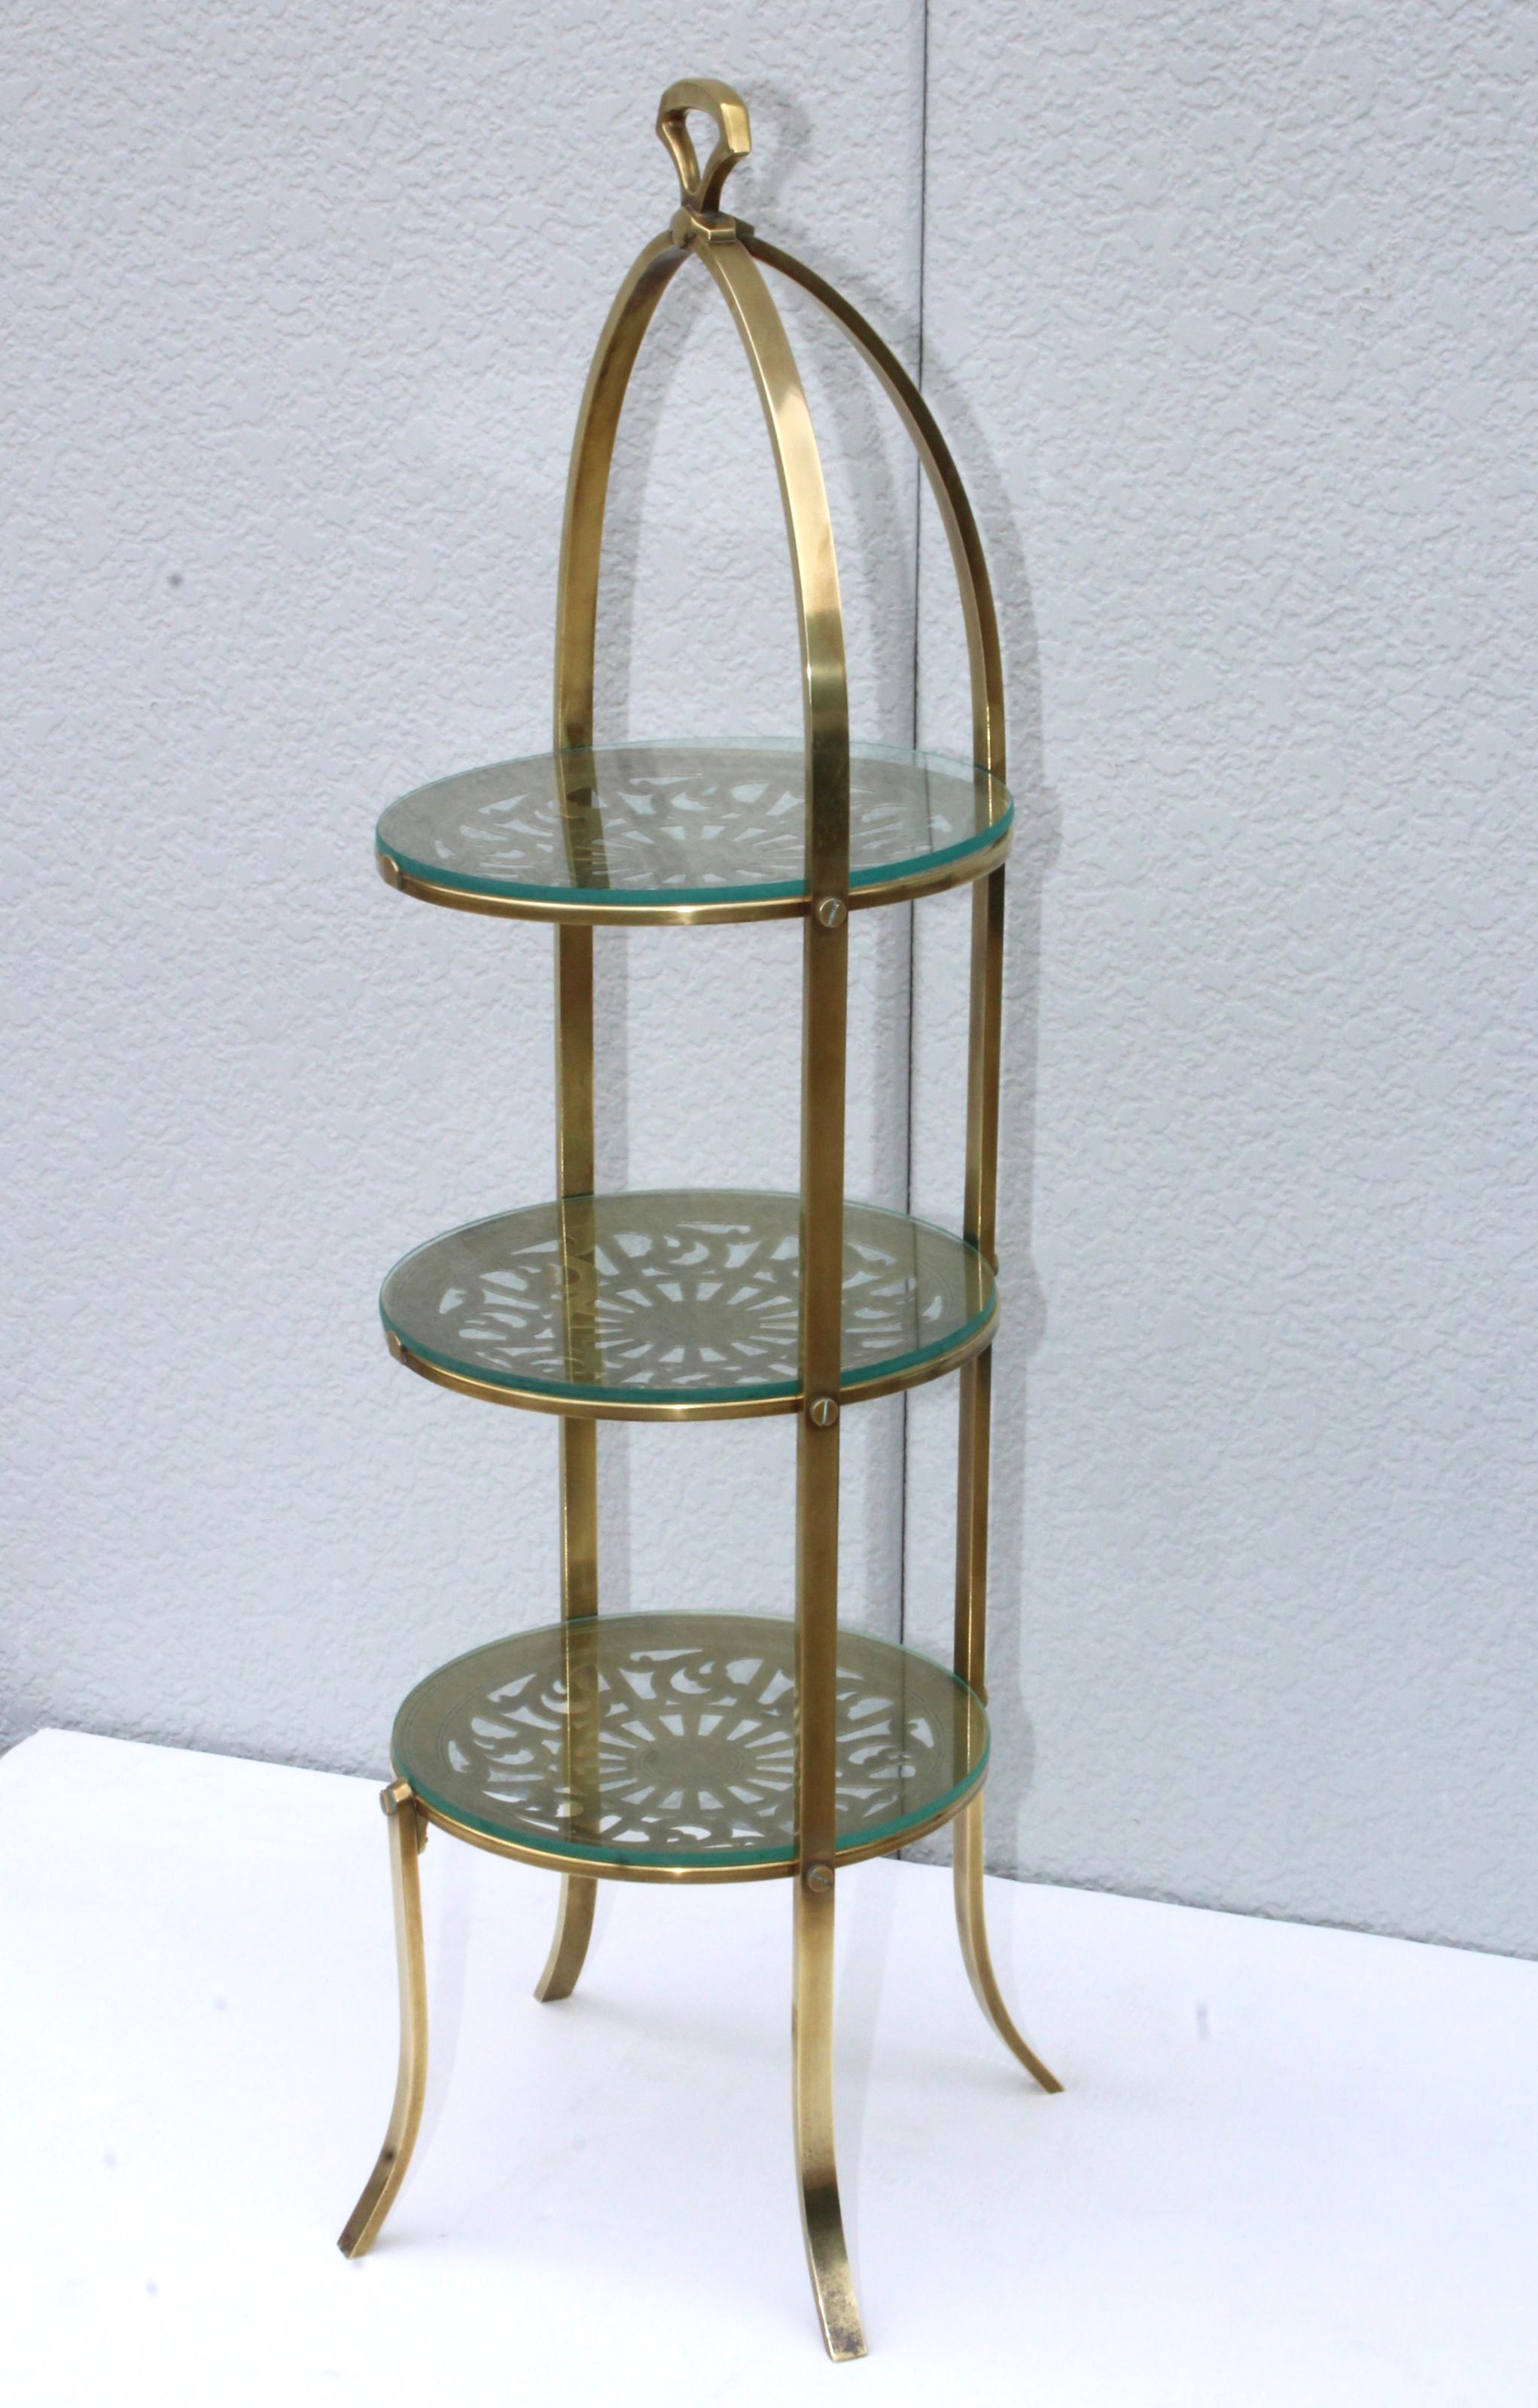 1950s modern 3-tier brass and glass cake stand by Manning Bowman.